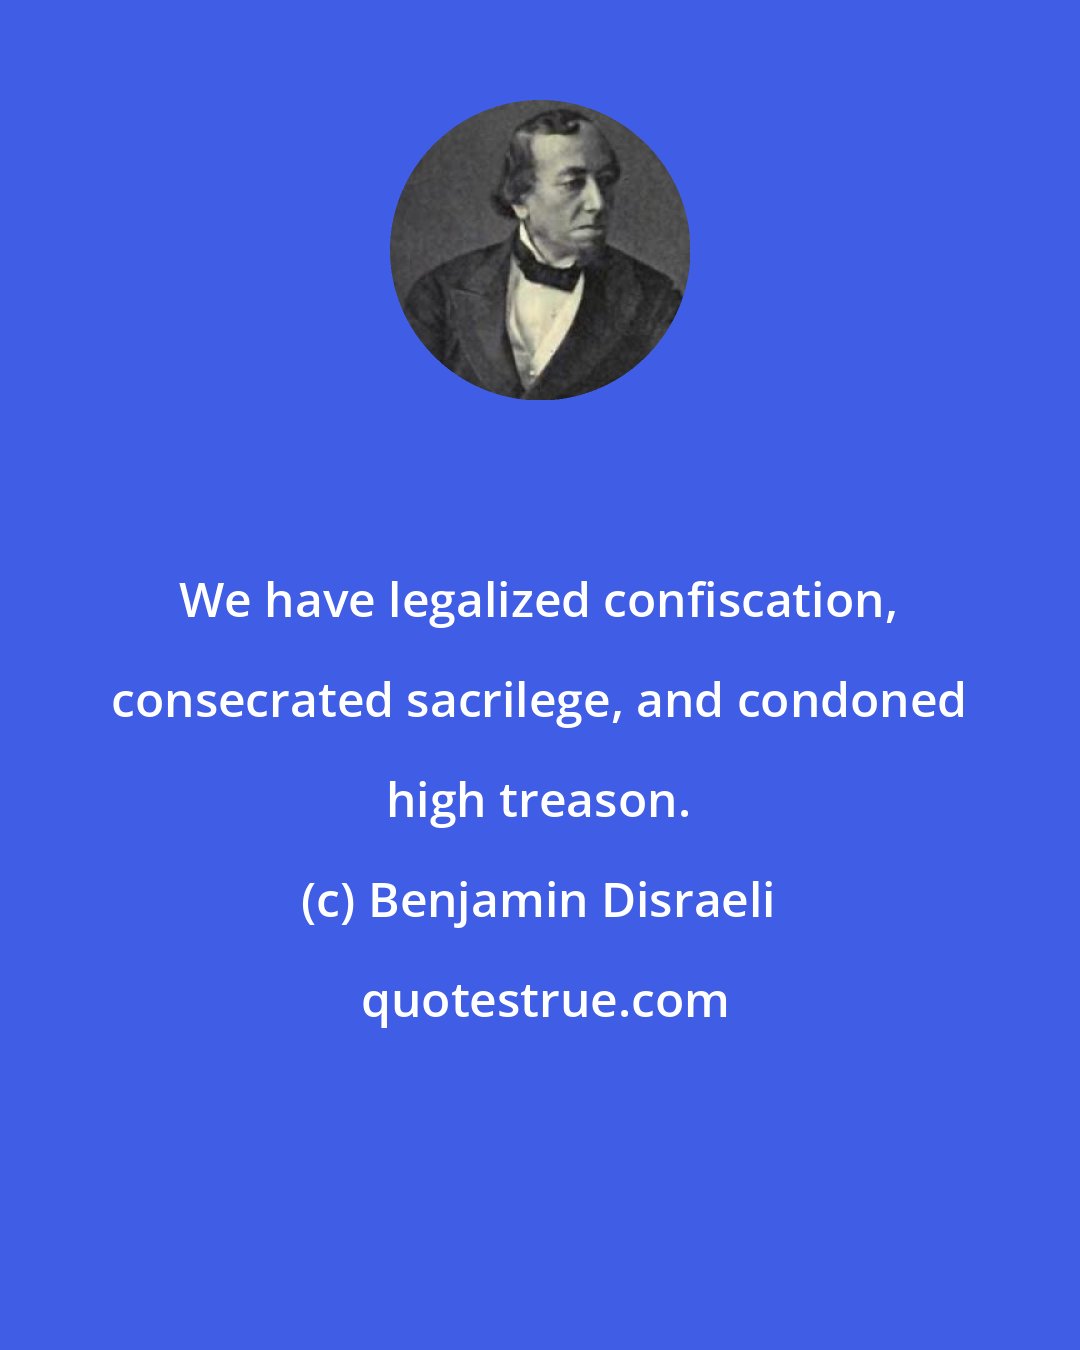 Benjamin Disraeli: We have legalized confiscation, consecrated sacrilege, and condoned high treason.